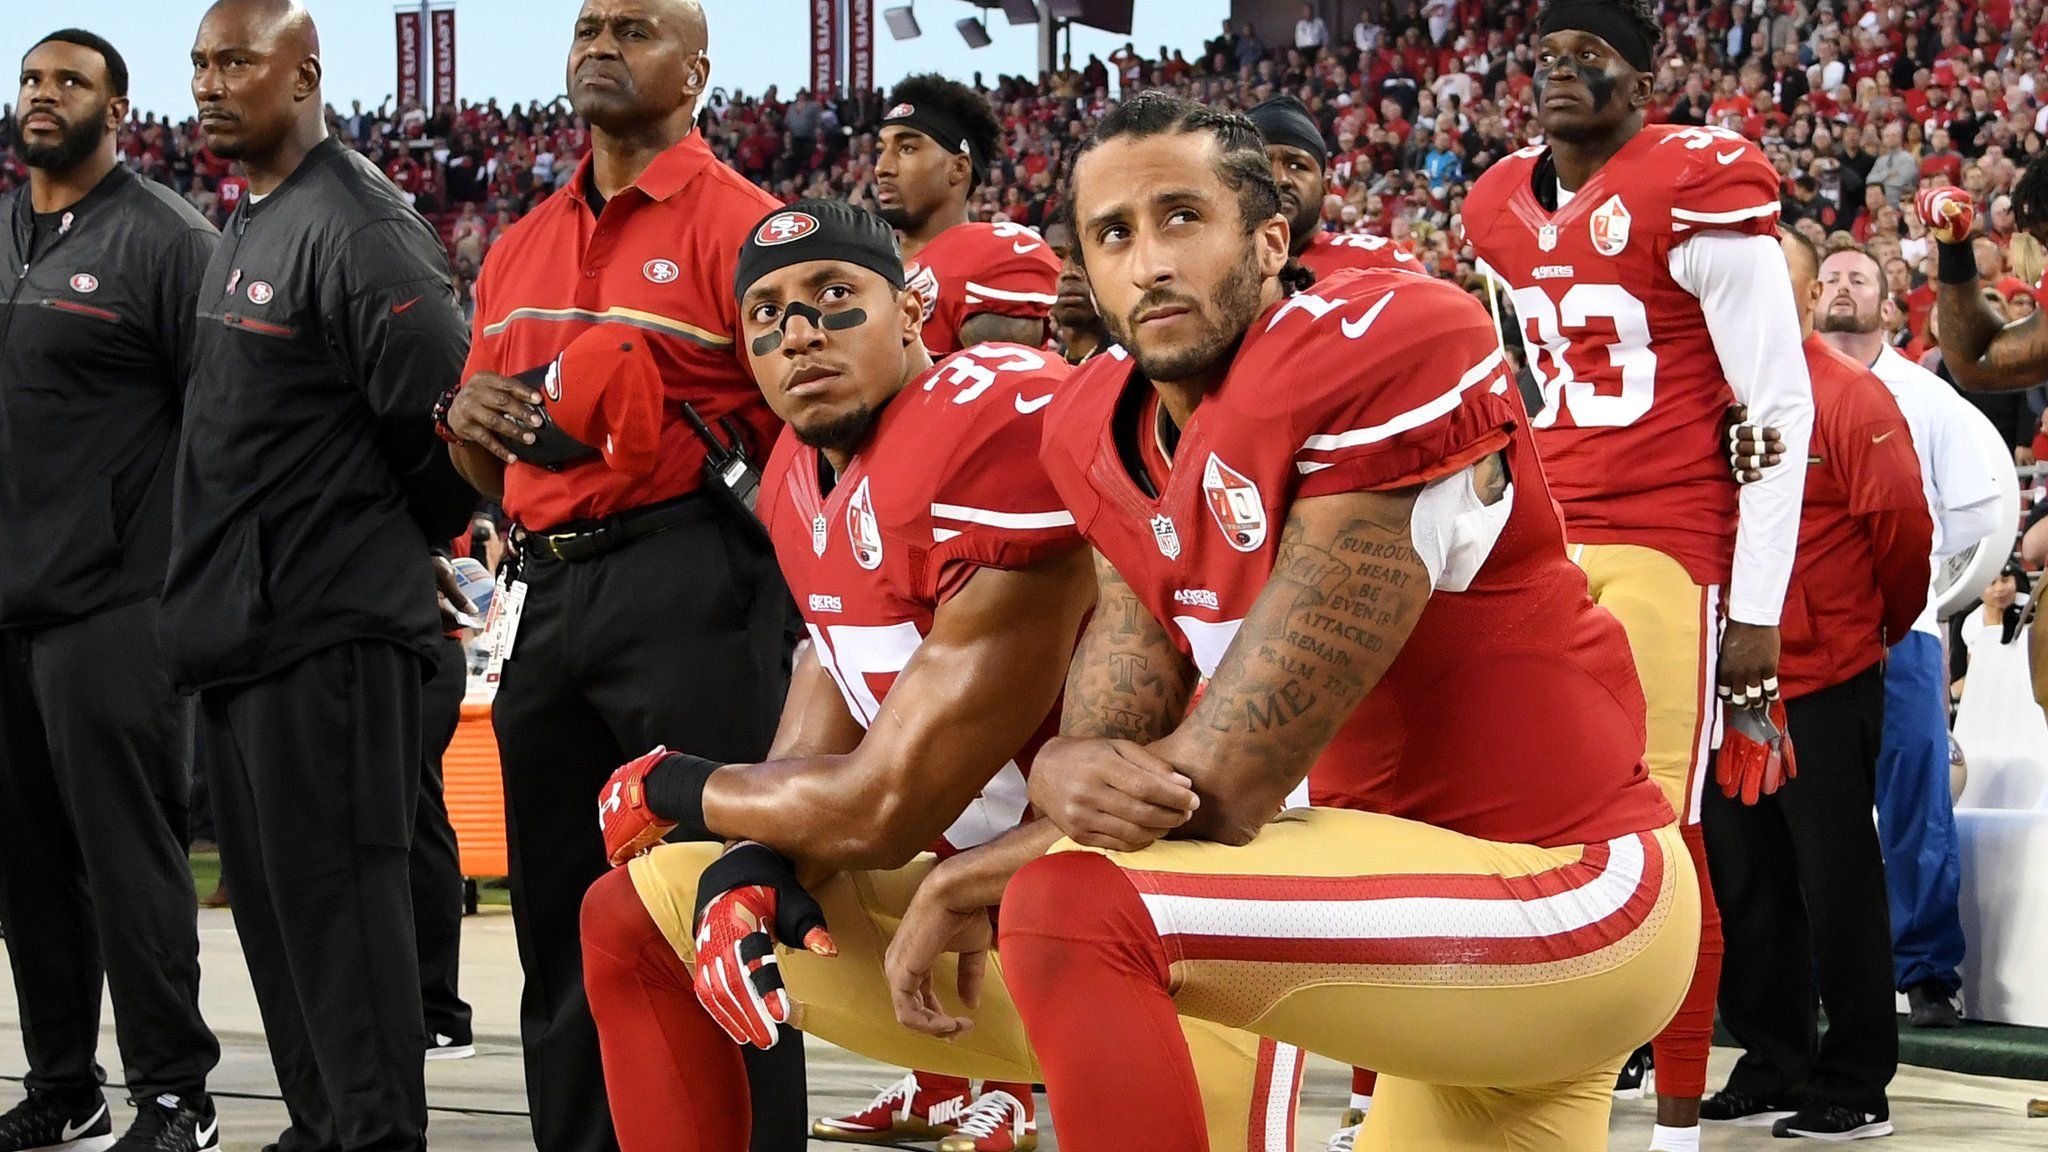 San Francisco 49ers players Eric Reid (left) and Colin Kaepernick (right) kneel during the US national anthem before an NFL game